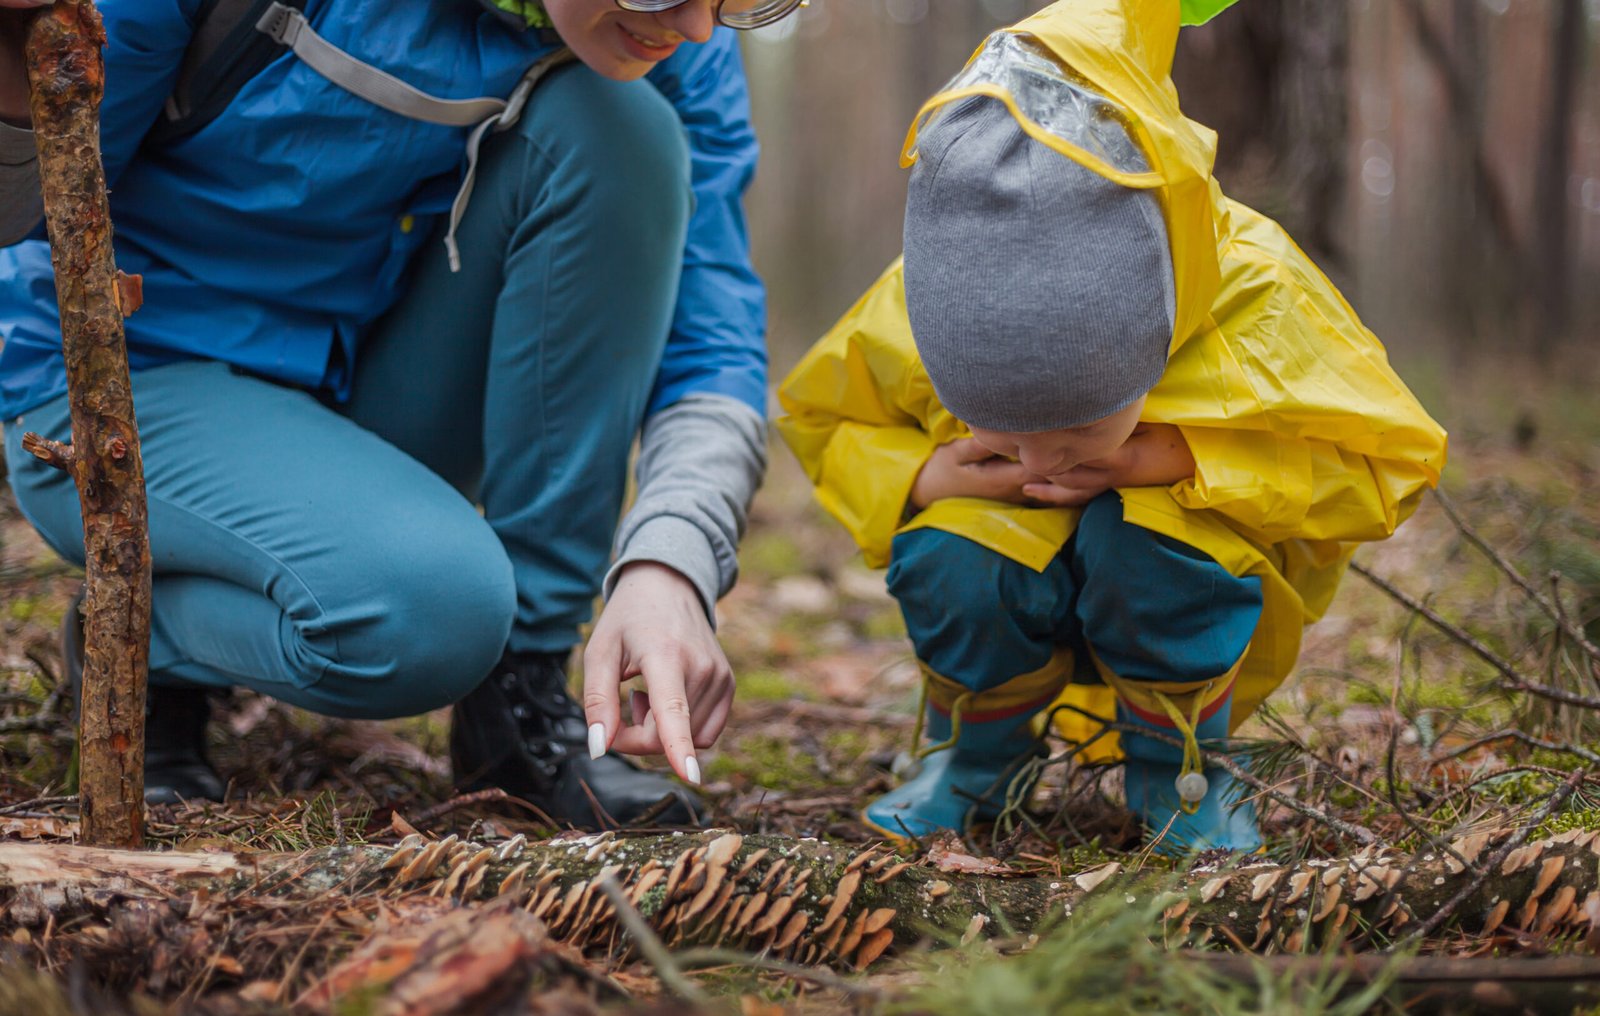 Mom and child walking in the forest after rain in raincoats together, looking at mushrooms on a fallen tree and talking